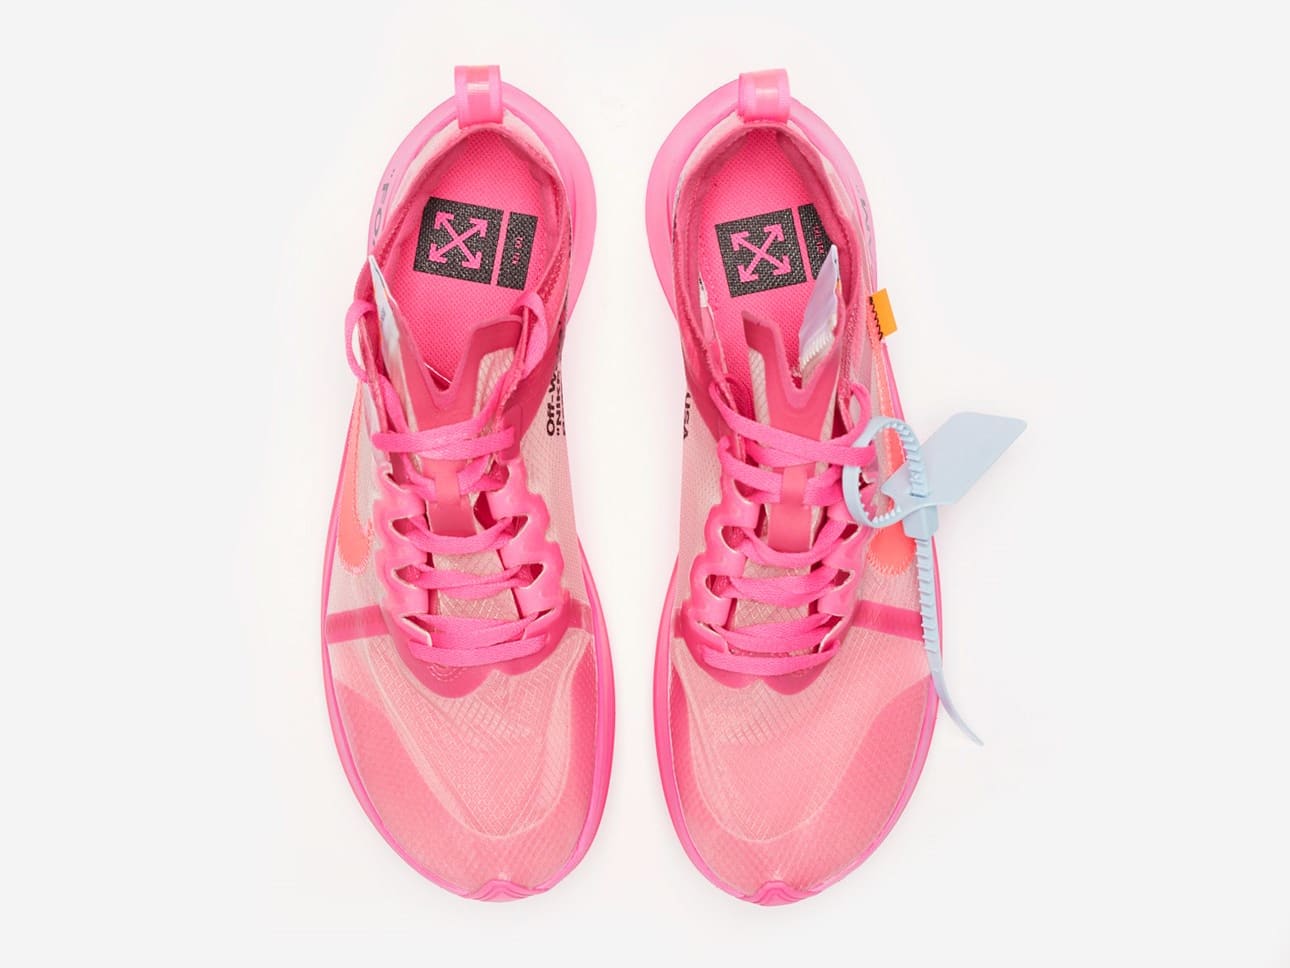 Off-White x Nike Zoom Fly 'Black' 'Tulip Pink' Release Date AJ4588-600 AJ4588-001 10/13/2018 | Sole Collector